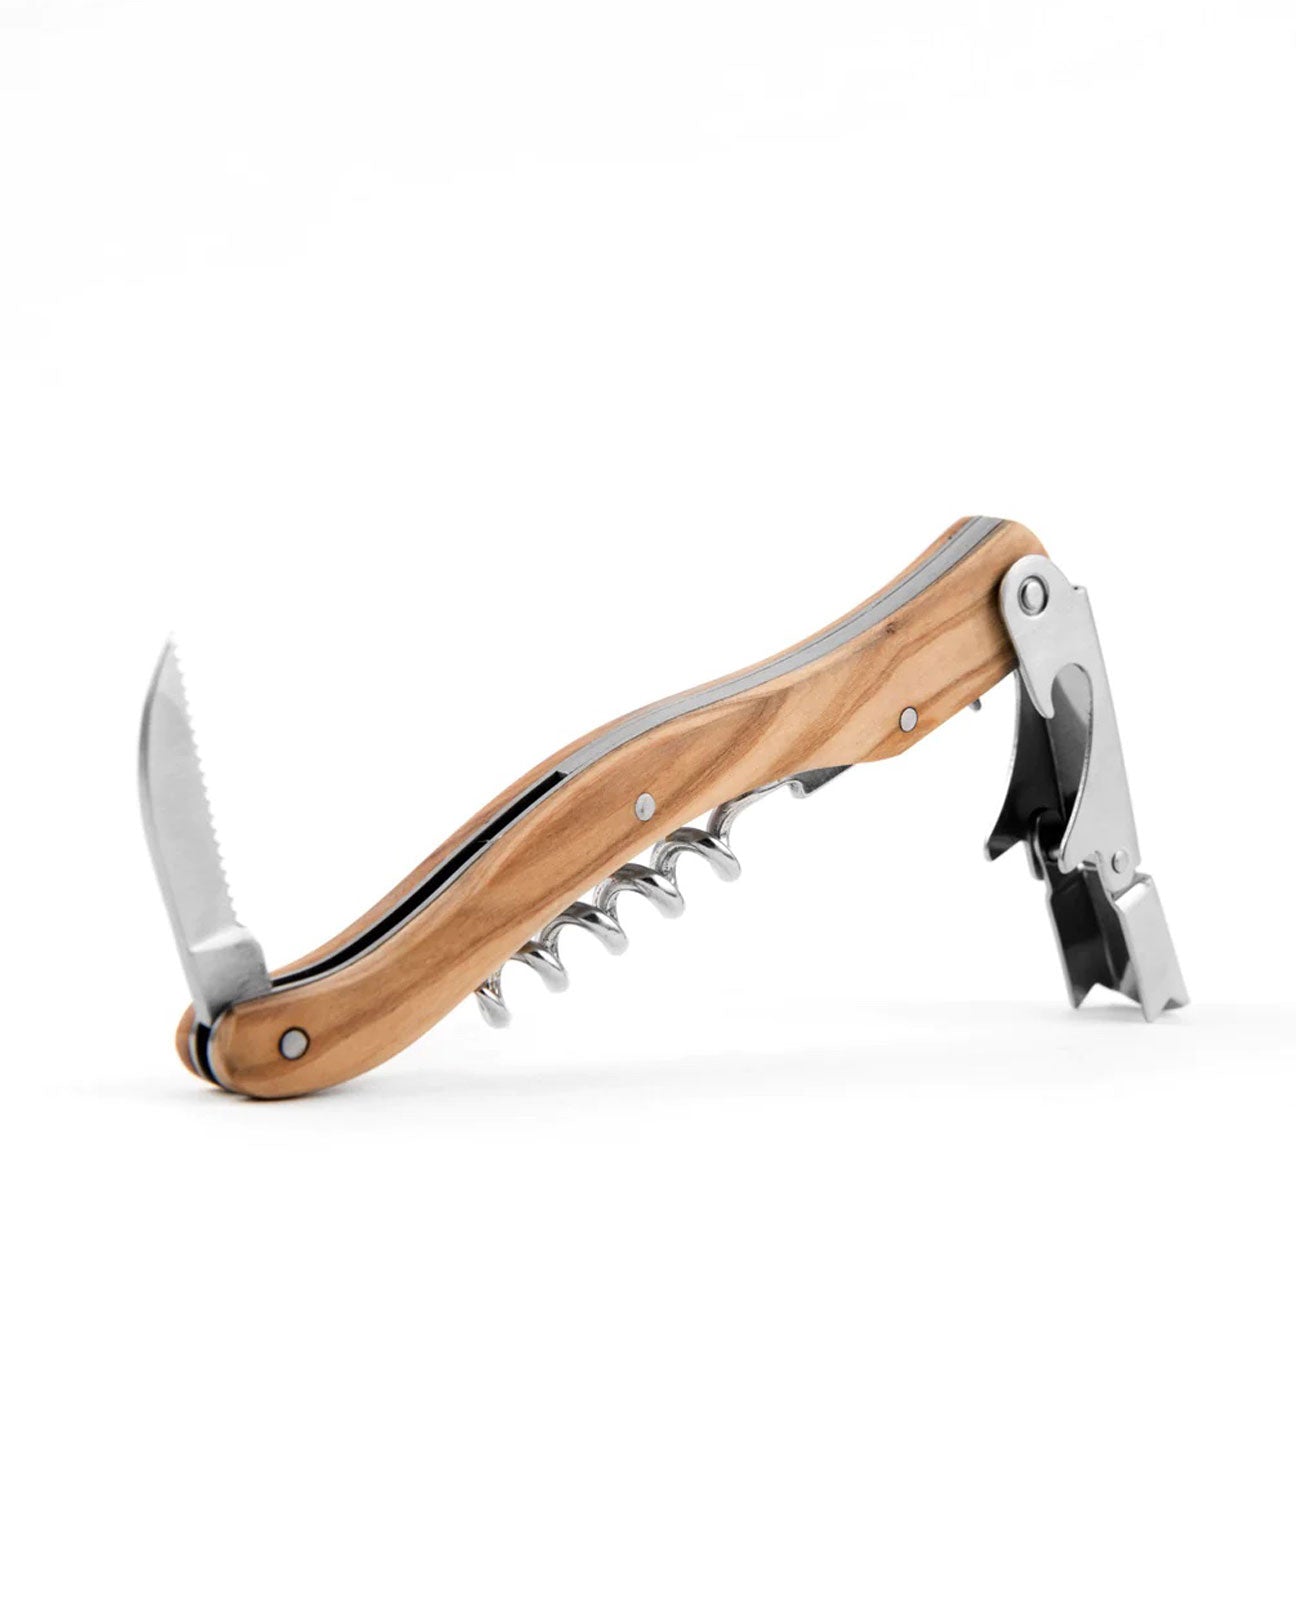 9 CHRISTOPHER Corkscrew with Leather Sleeve in Olivewood available at Lahn.shop